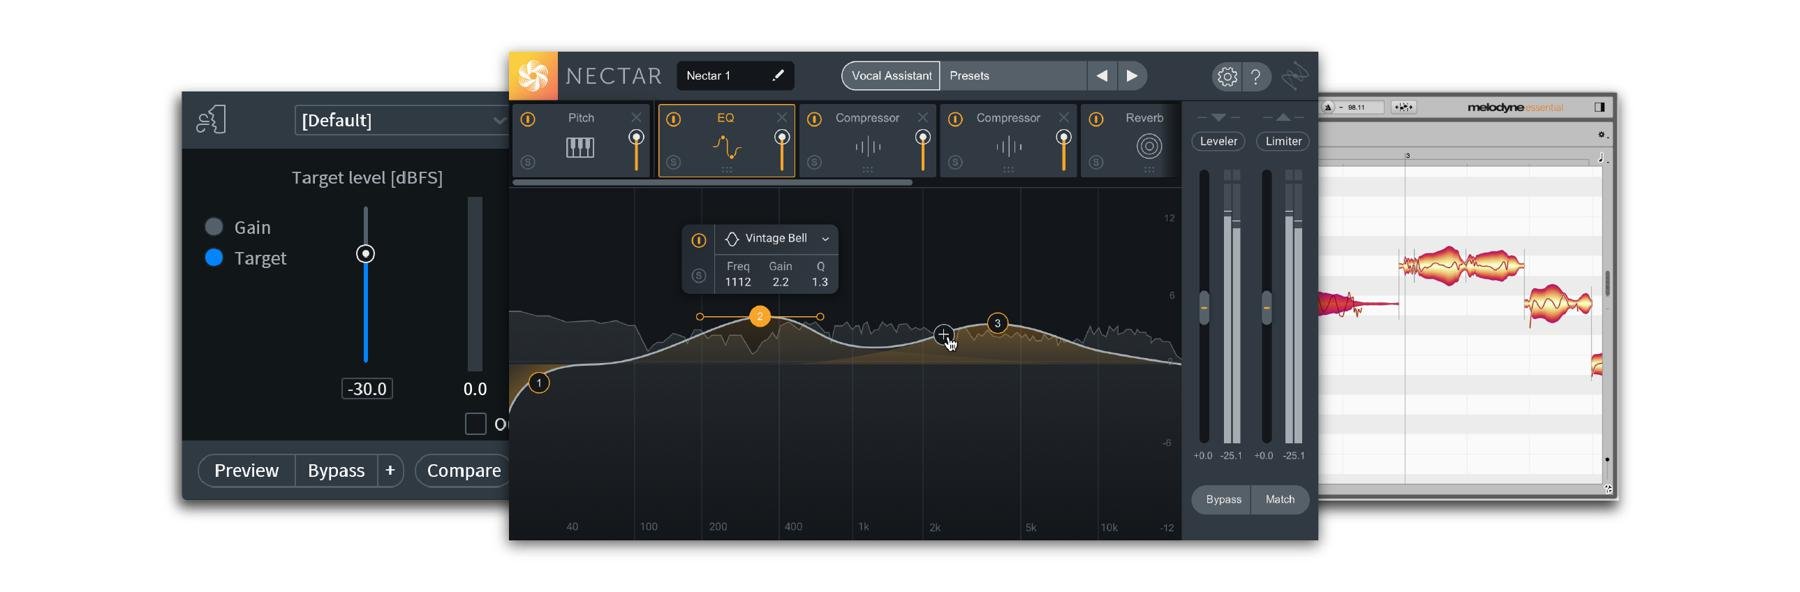 Nectar elements free trial